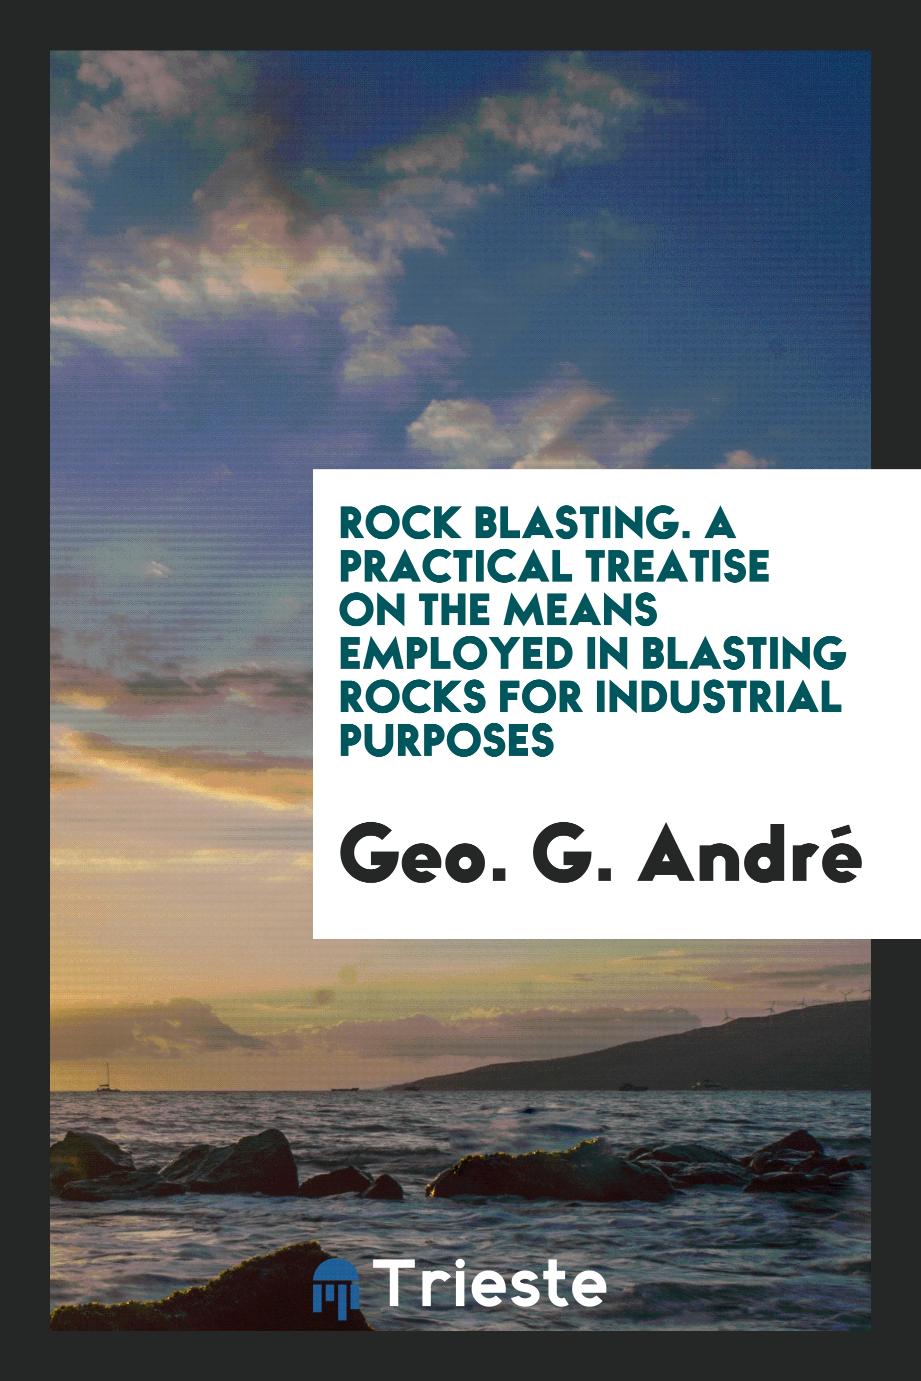 Rock blasting. A practical treatise on the means employed in blasting rocks for industrial purposes